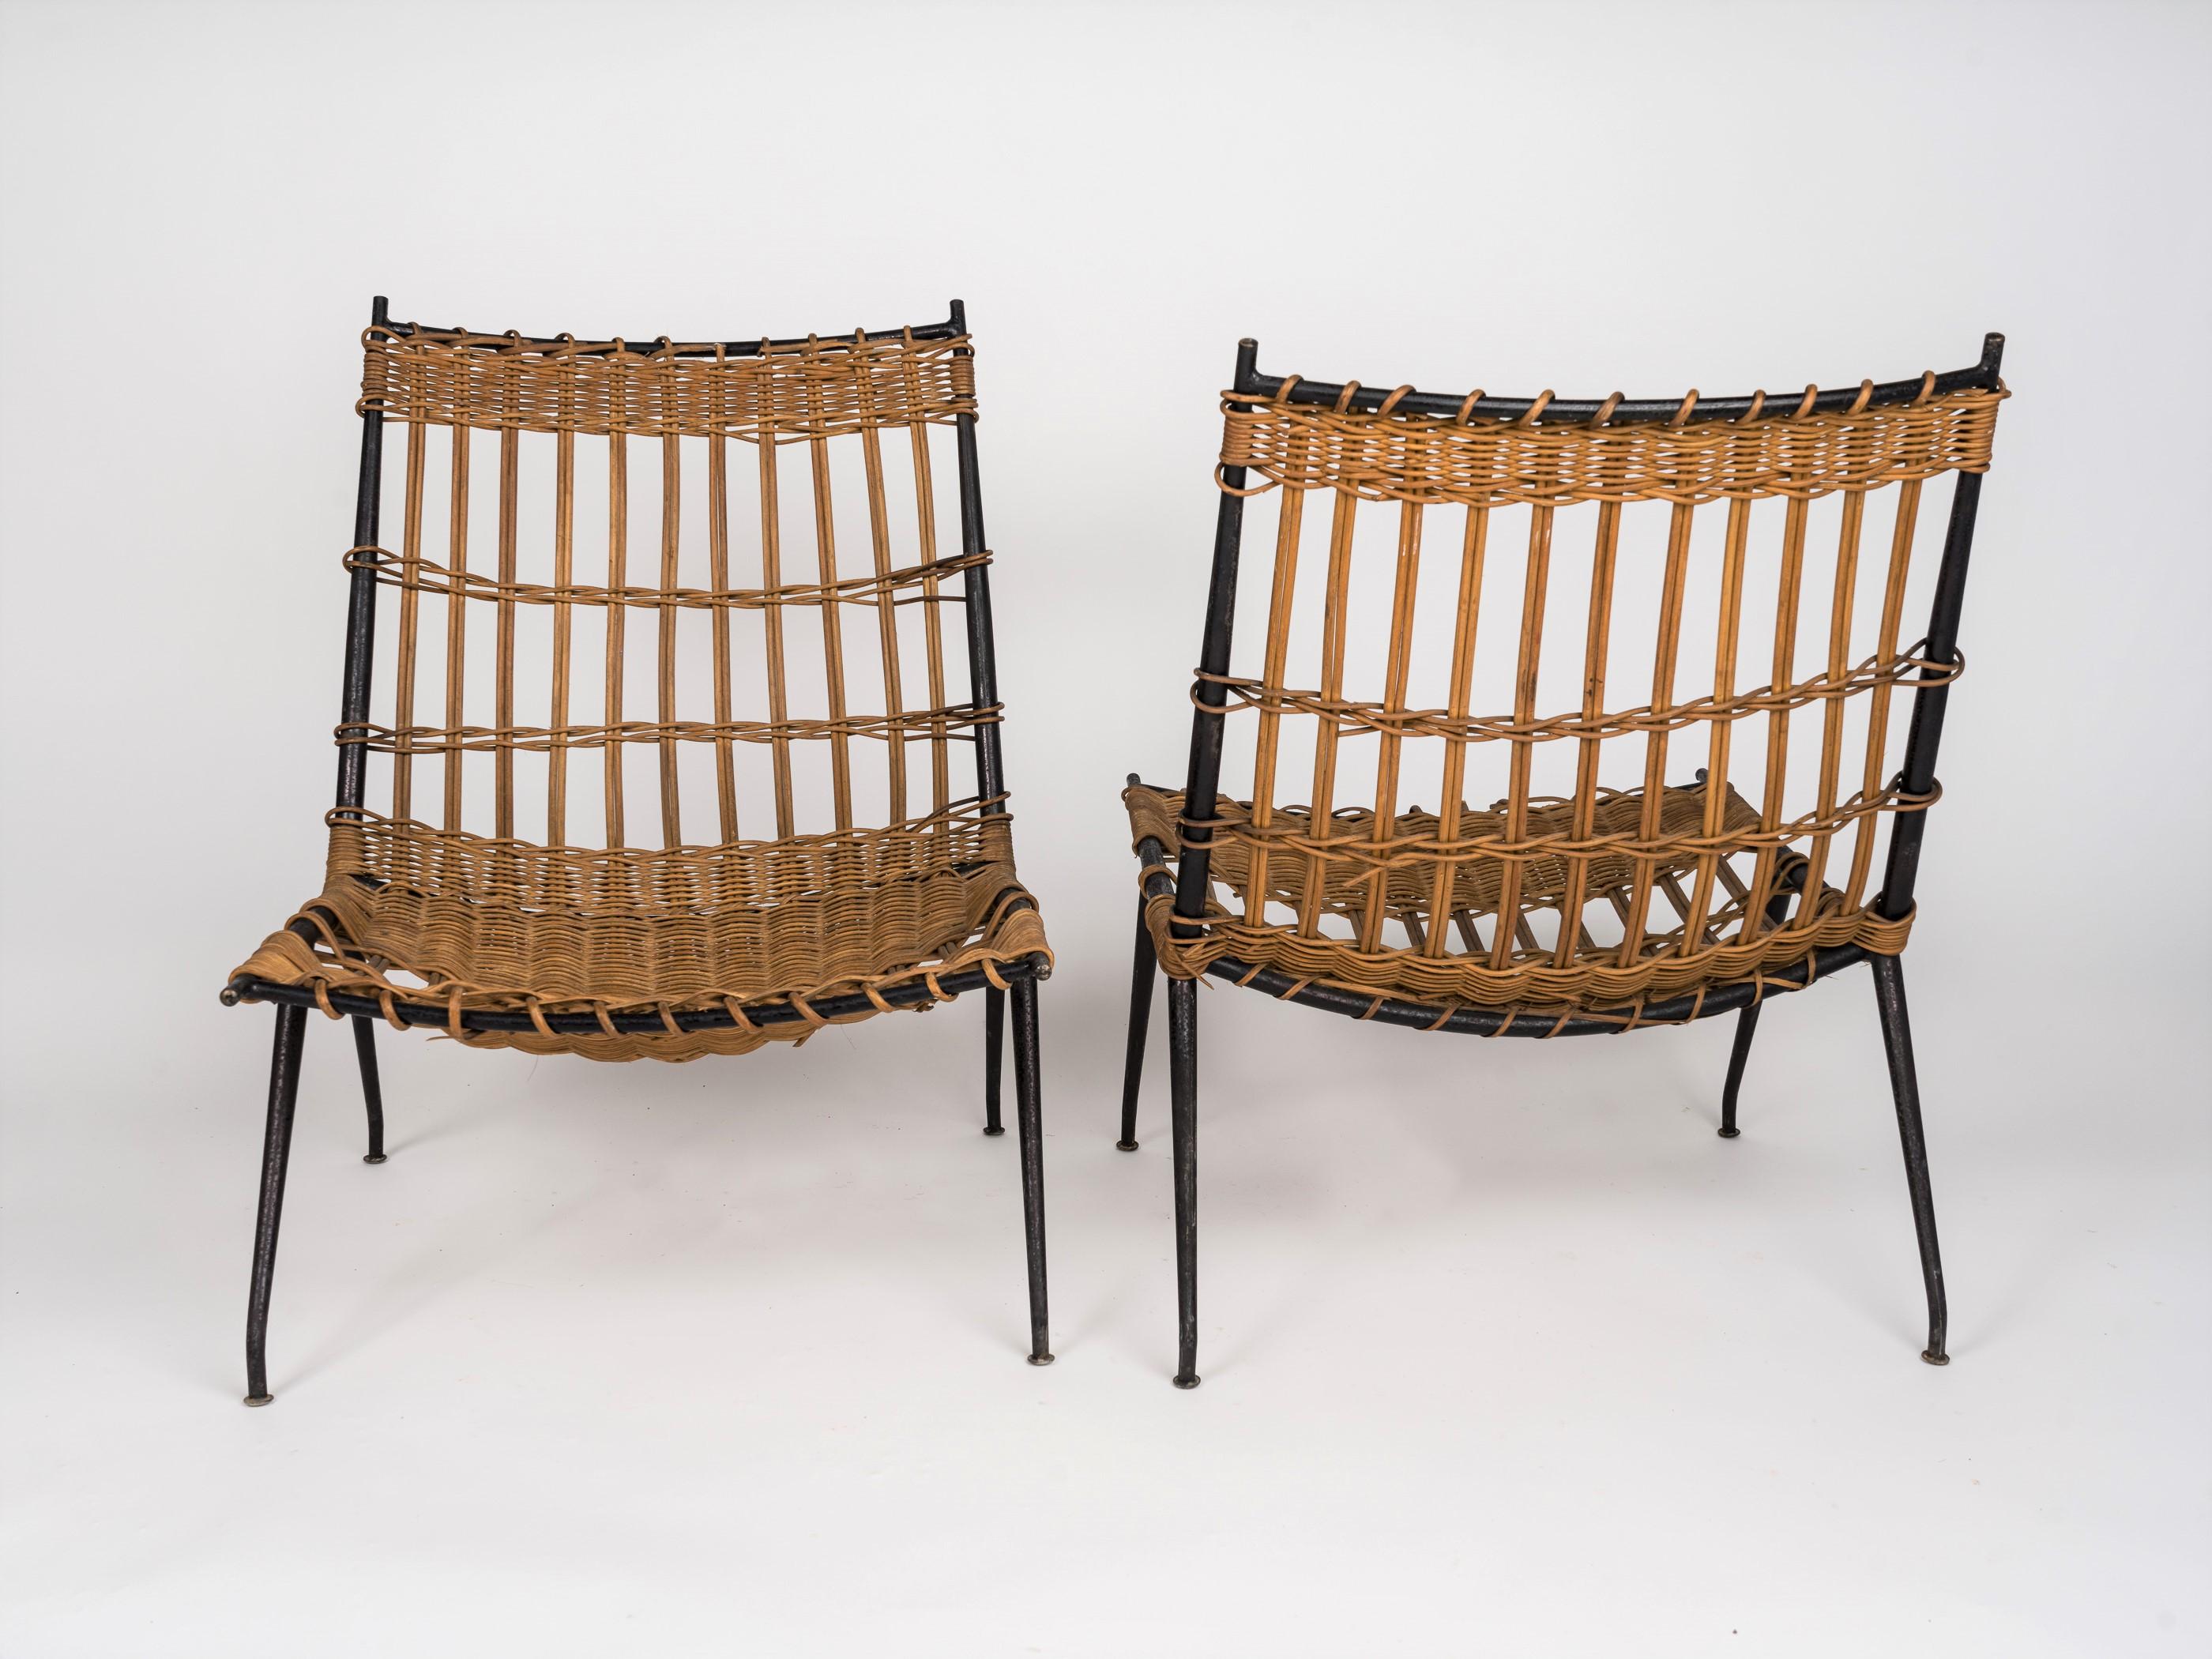 Pair of Rattan & Lacquered Iron Chairs by Raoul Guys, France 1950's In Fair Condition For Sale In New York, NY